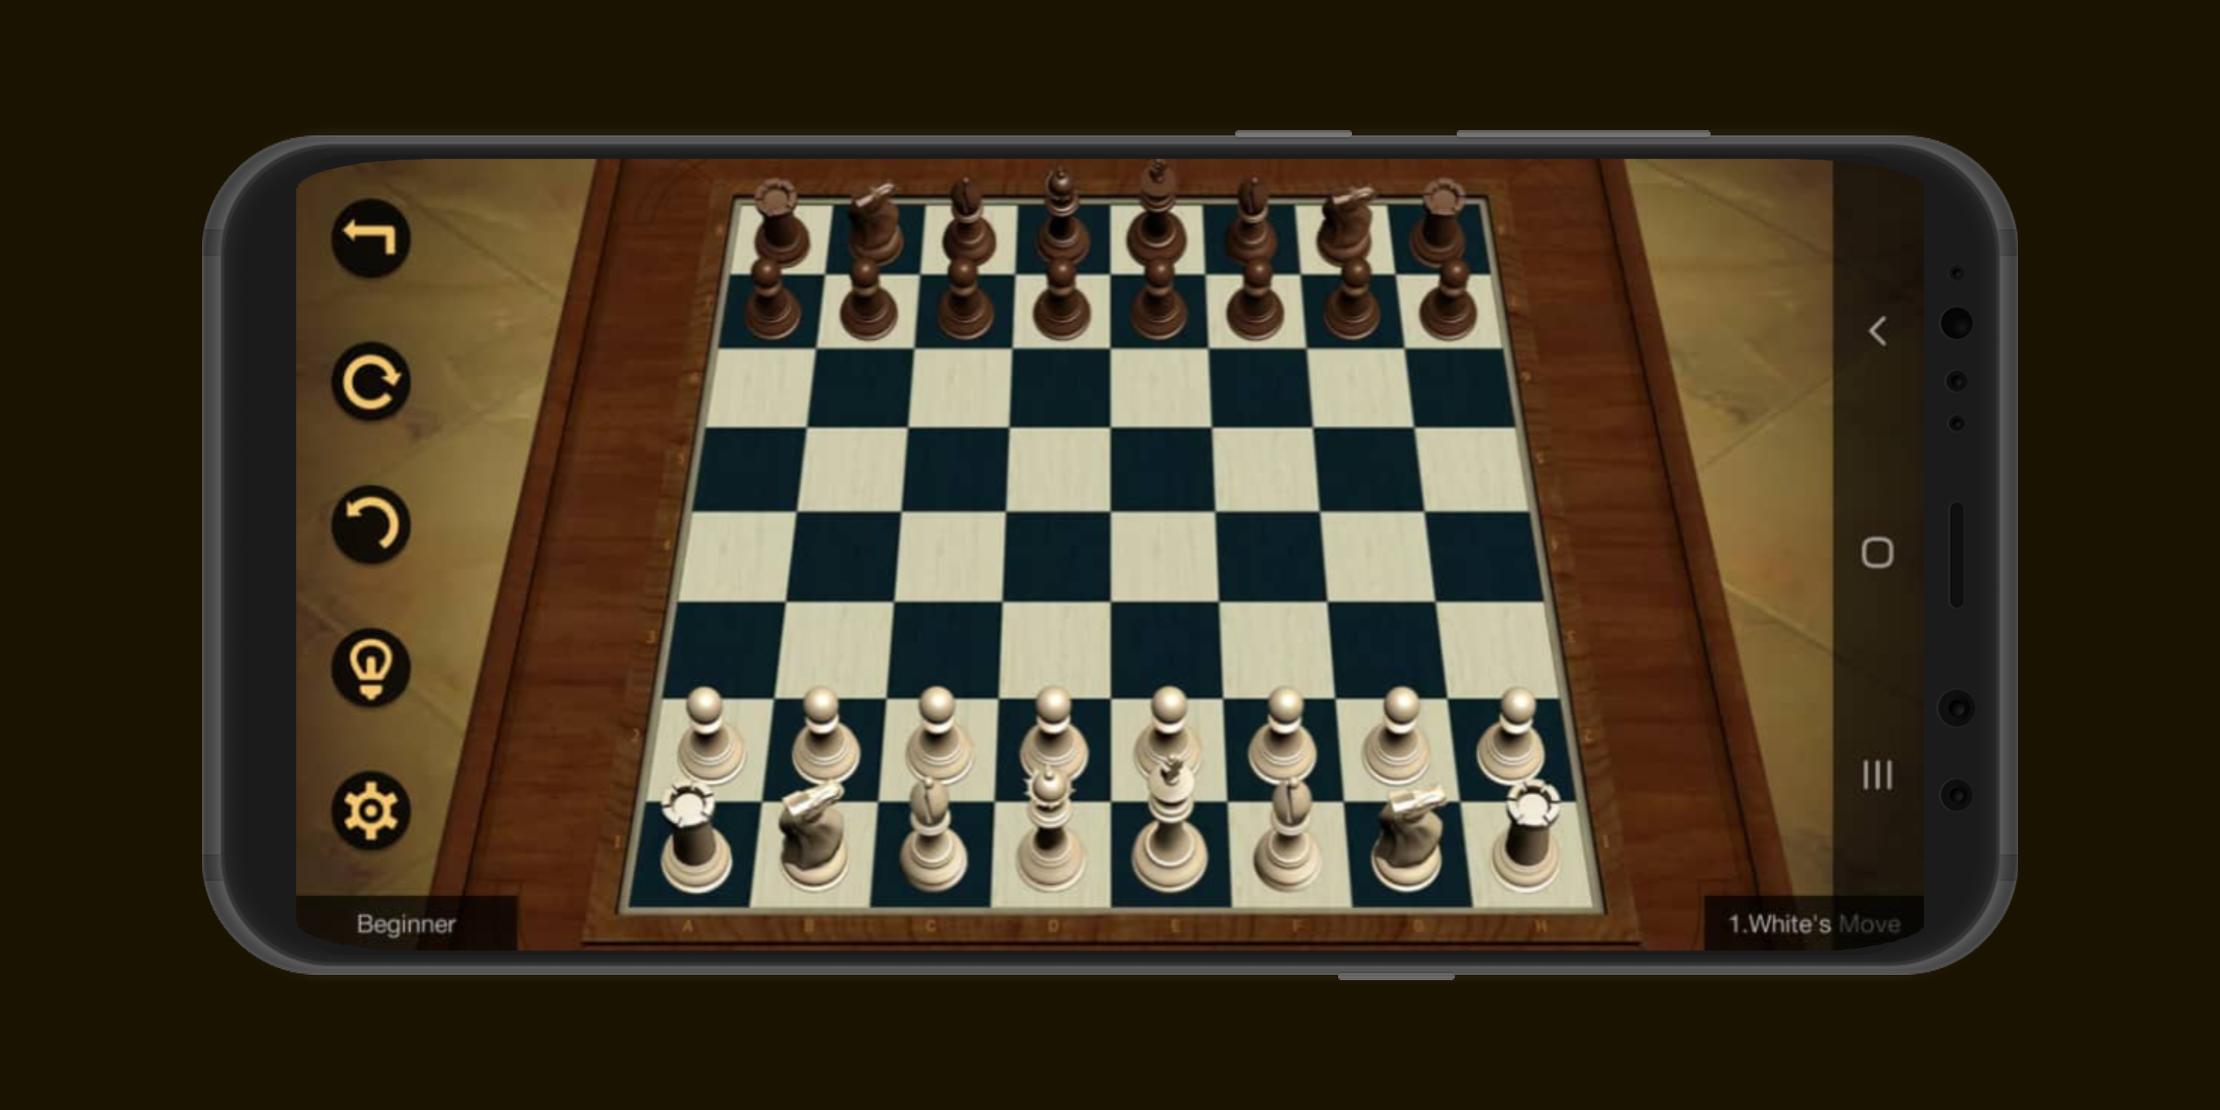 Stream Chess Titans 3D: Download the Best Free Offline Chess Game for  Android from Michelle